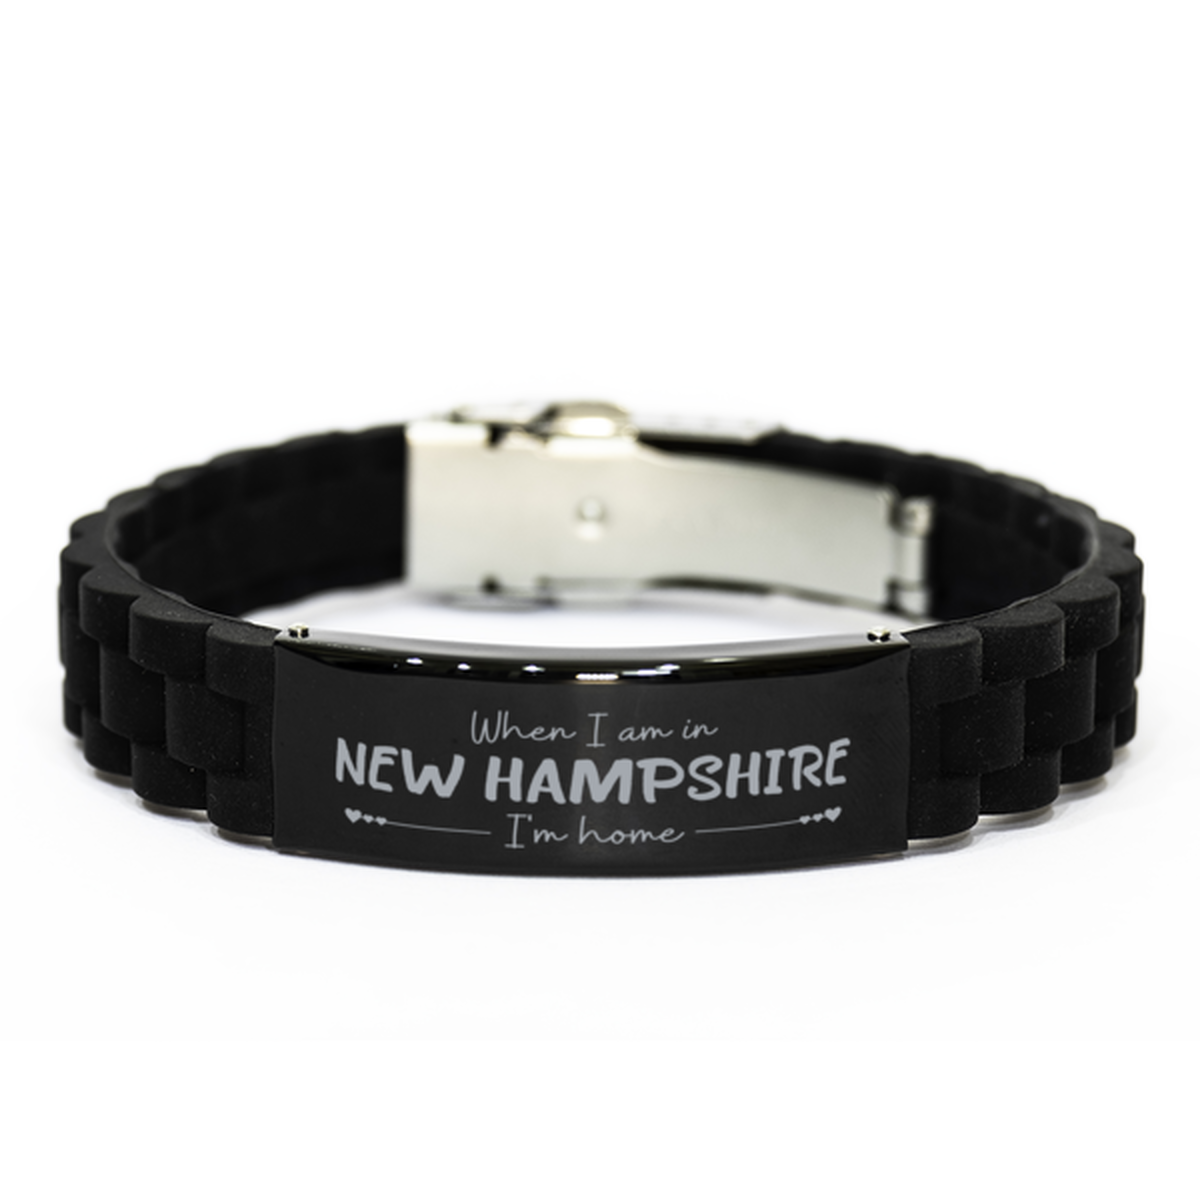 When I am in New Hampshire I'm home Black Glidelock Clasp Bracelet, Cheap Gifts For New Hampshire, State New Hampshire Birthday Gifts for Friends Coworker